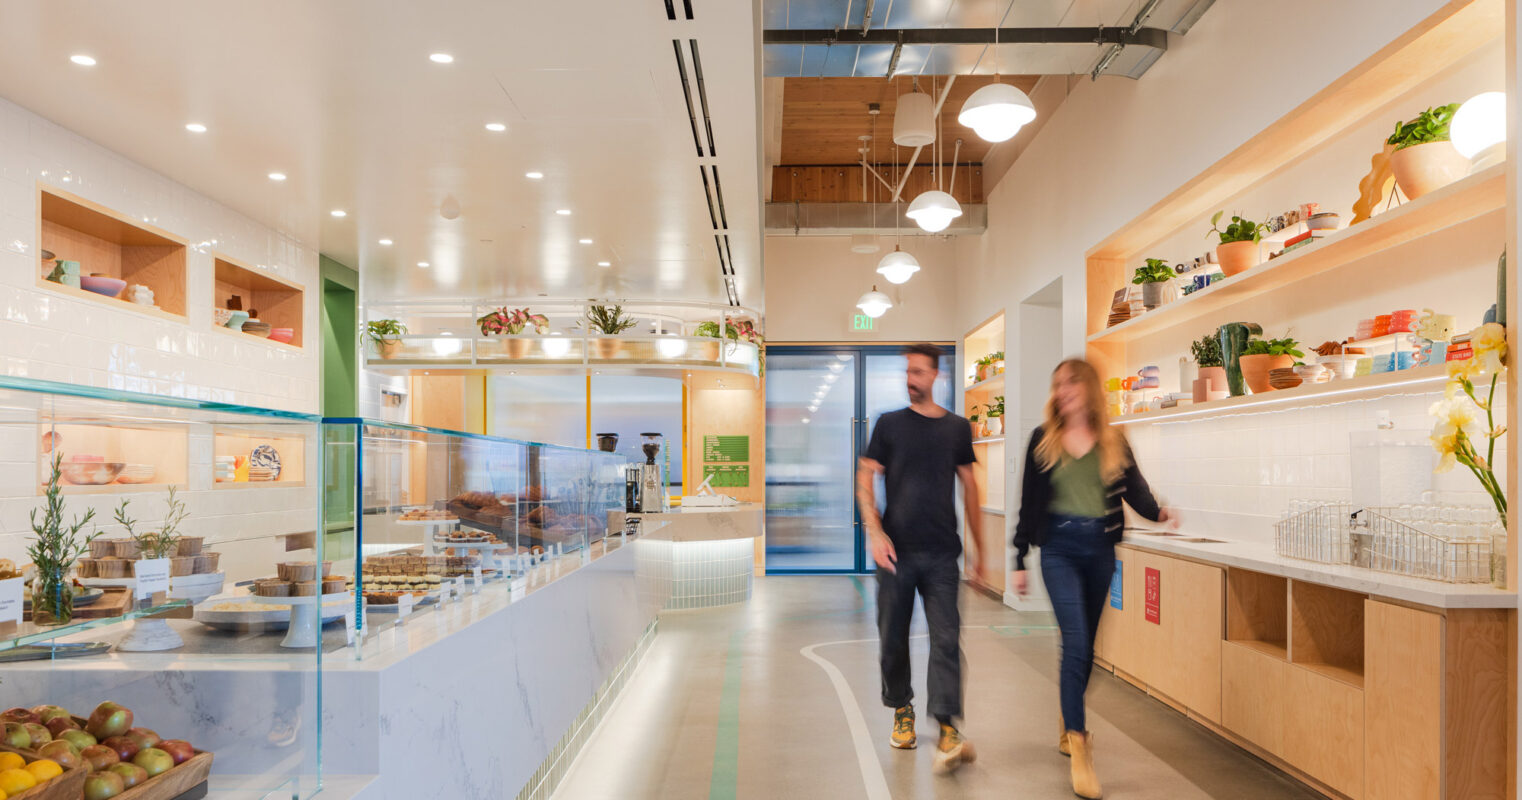 Open-concept café interior featuring natural wood finishes, recessed lighting, and custom shelving displaying fresh produce. A central glass partition accents the modern, inviting space.